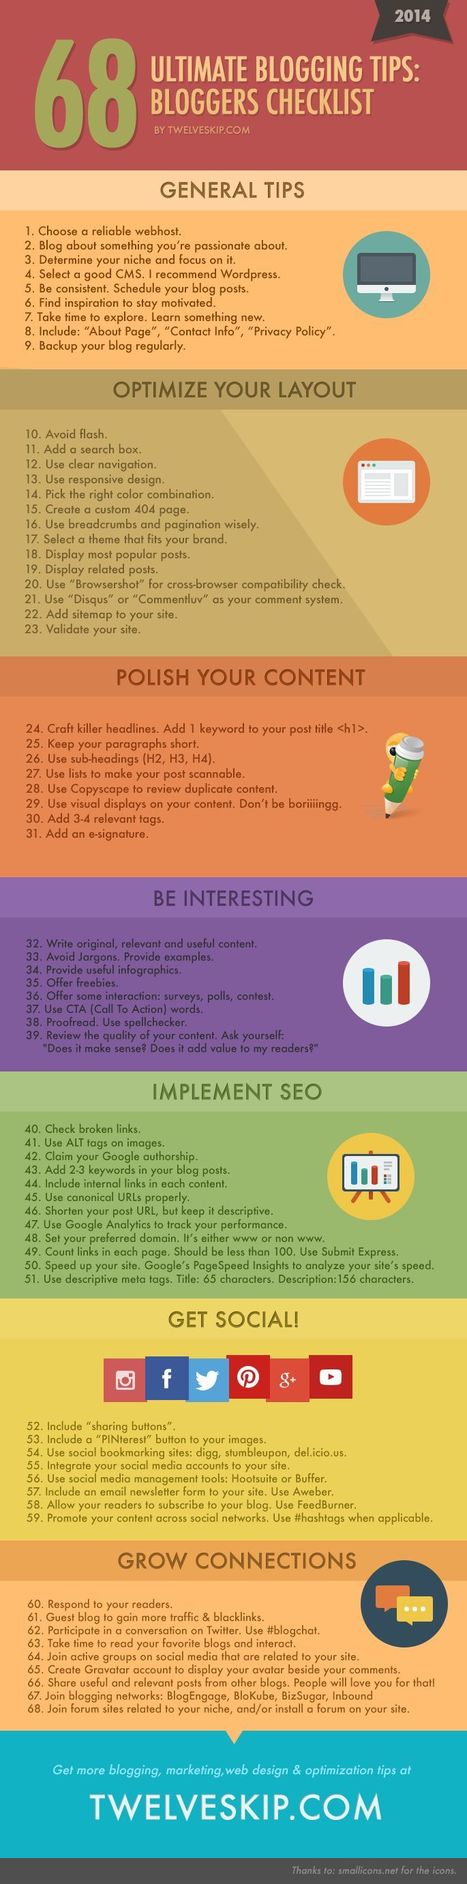 68 Best Blogging Tips: Bloggers Ultimate Checklist 2014 | Infographic | Education 2.0 & 3.0 | Scoop.it